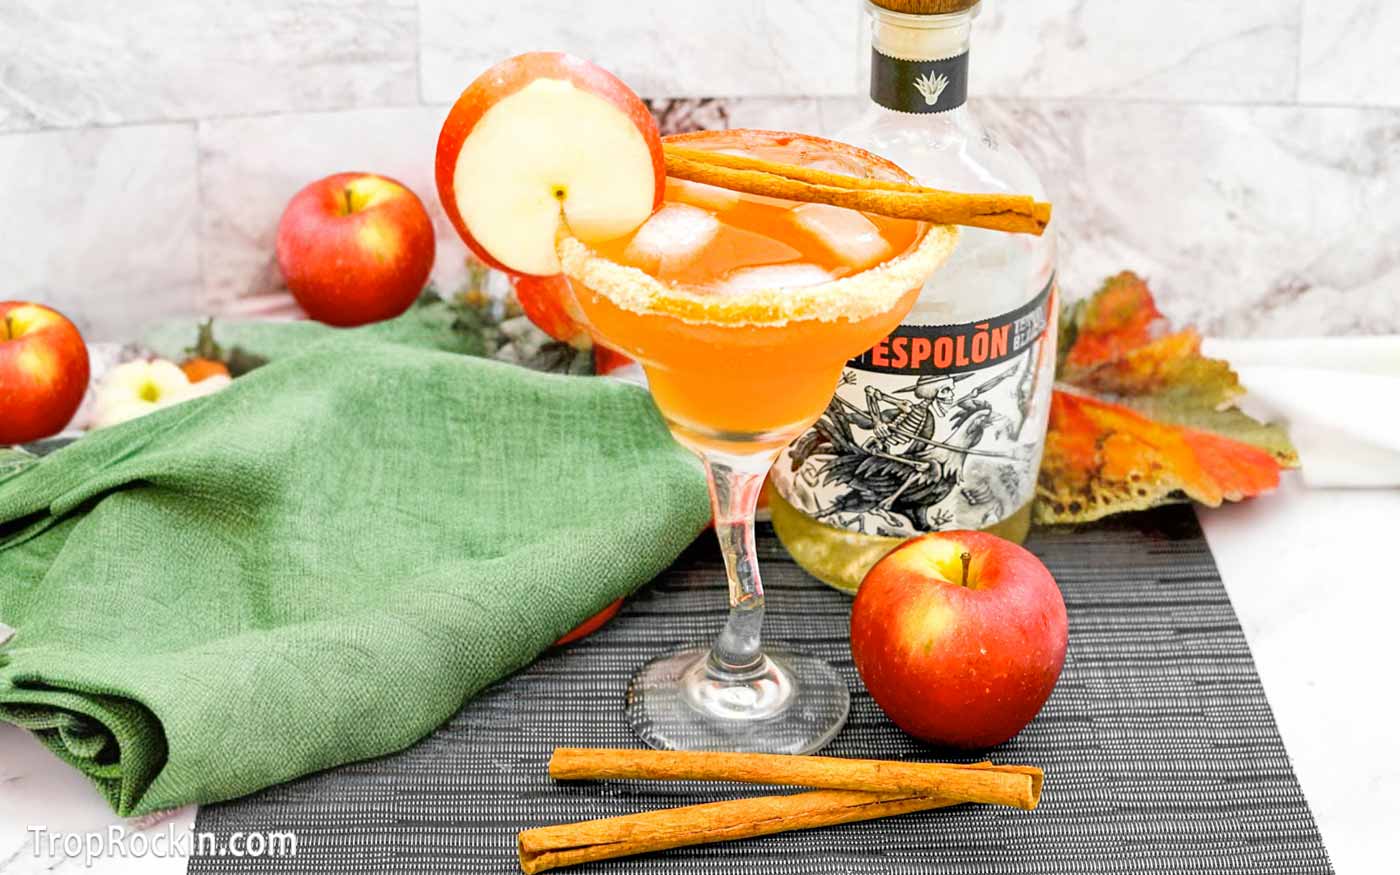 Cranberry Apple Margarita in a margarita glass with brown sugar rim and garnished with an apple wheel slice and a cinnamon stick. A bottle of tequila and whole apples in the background with a green linen napkin.